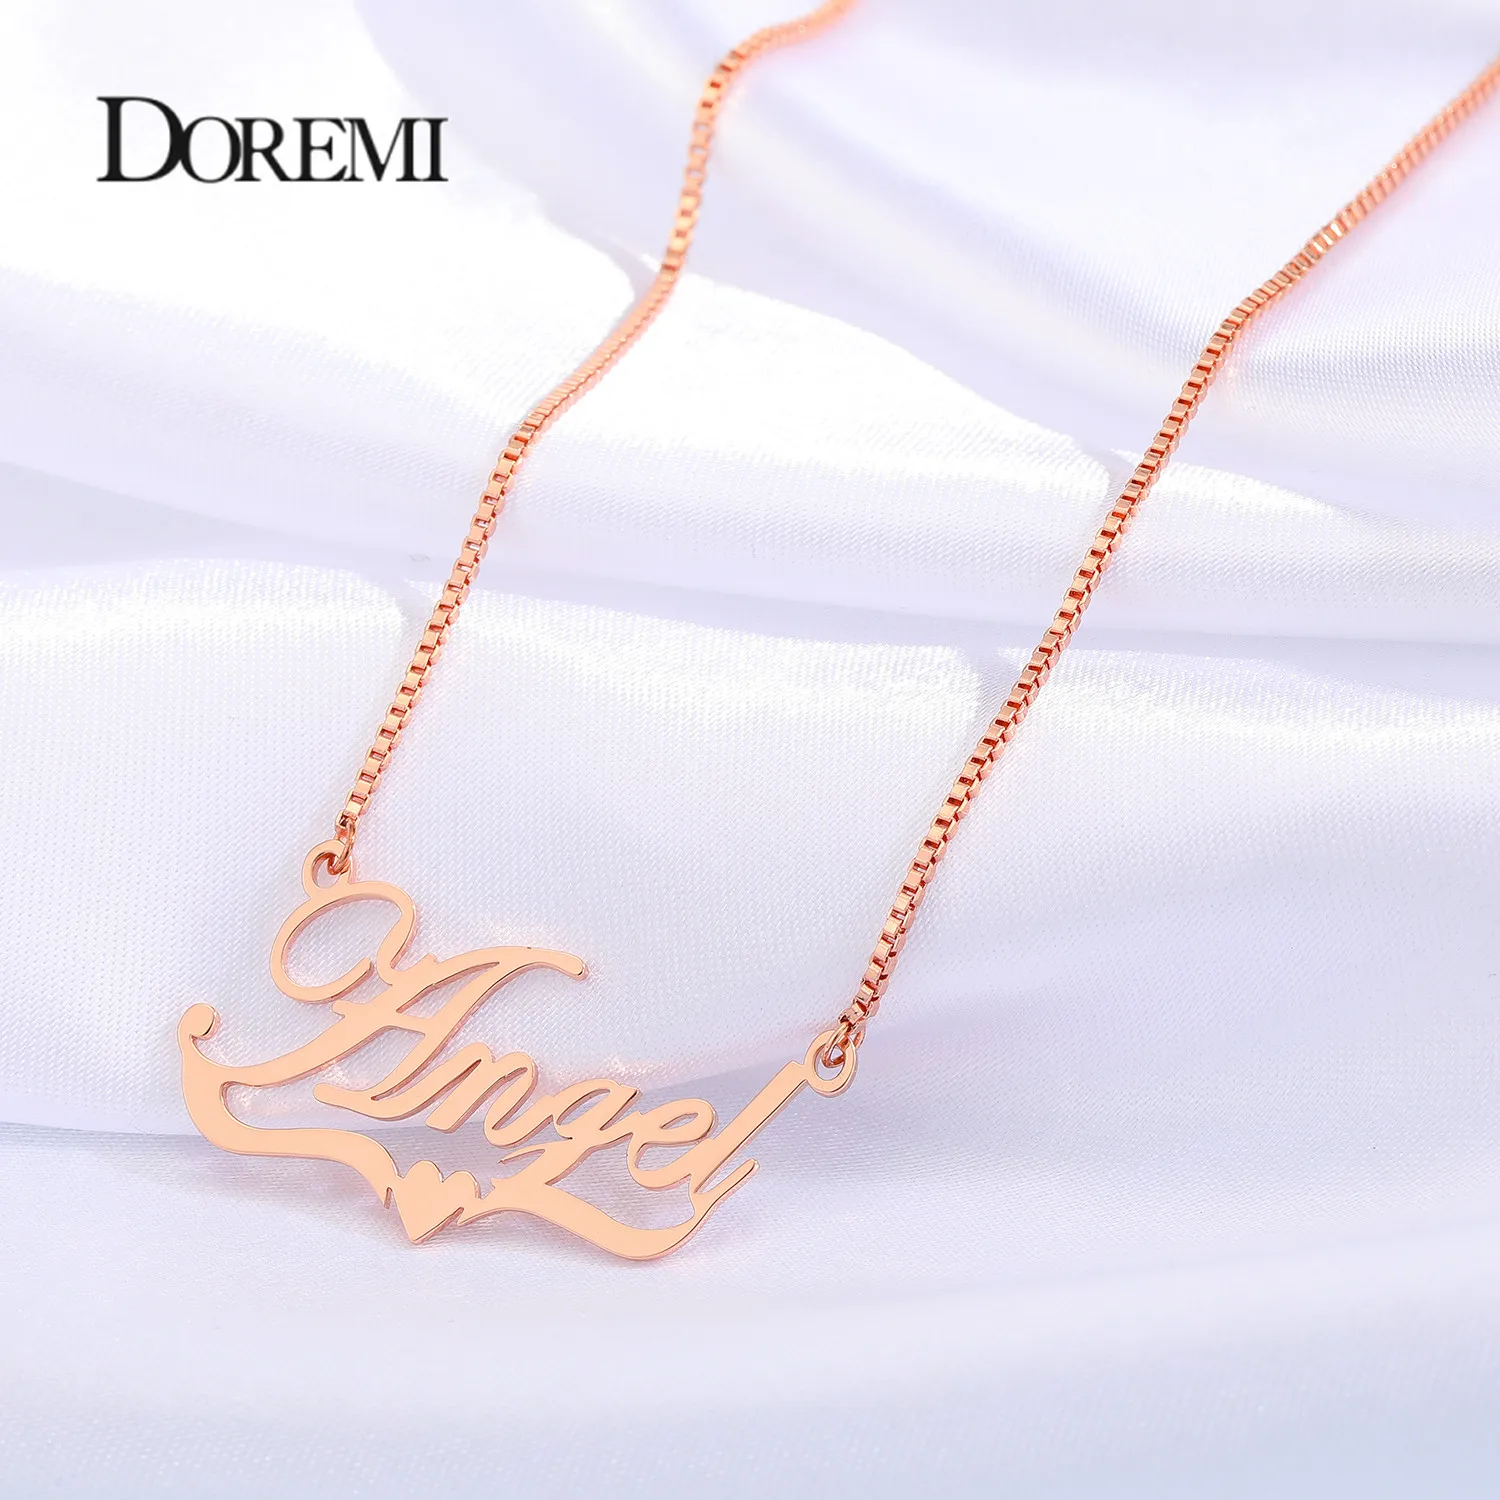 DOREMI Stainless Steel  Custom Name Necklace Personalized Name Pendant Heart Choker for Women Men Jewelry Valentine's Day Gift vintage jewelry box antique heart shaped treasure organizer classic heart shape metal gift box for valentine s day festivals